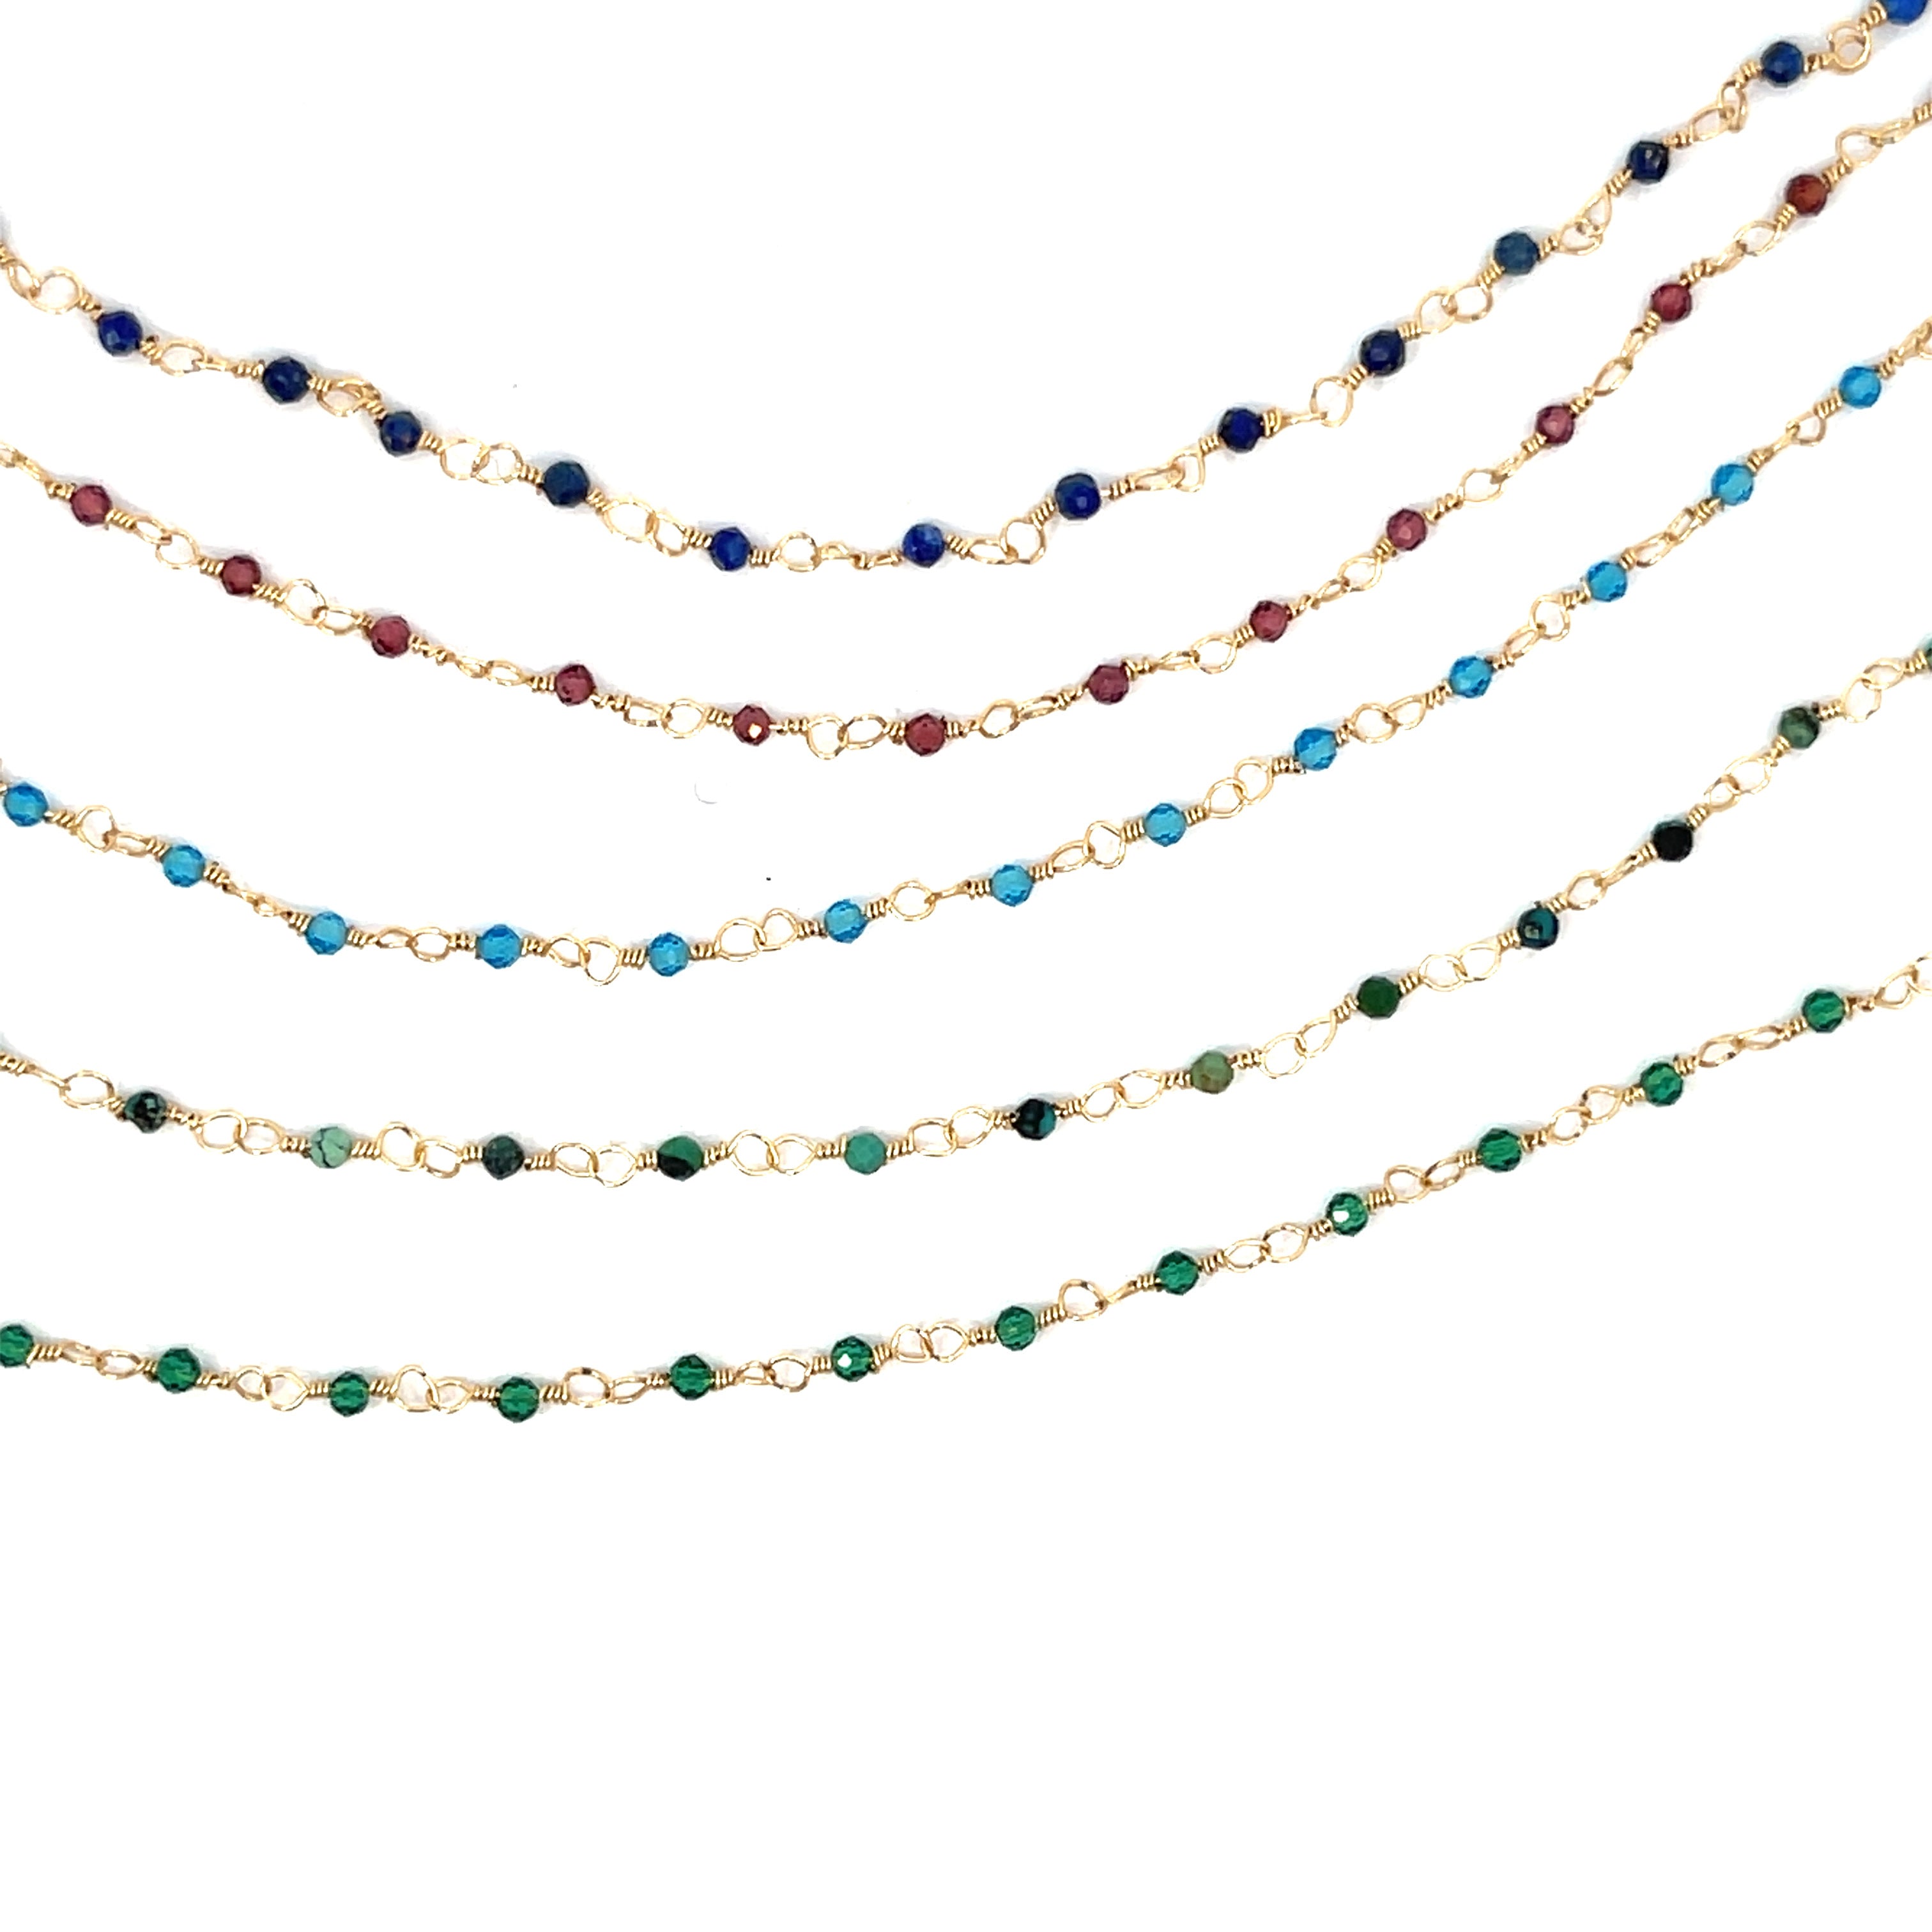 Discover Chic Chiyo Beaded Necklaces Online